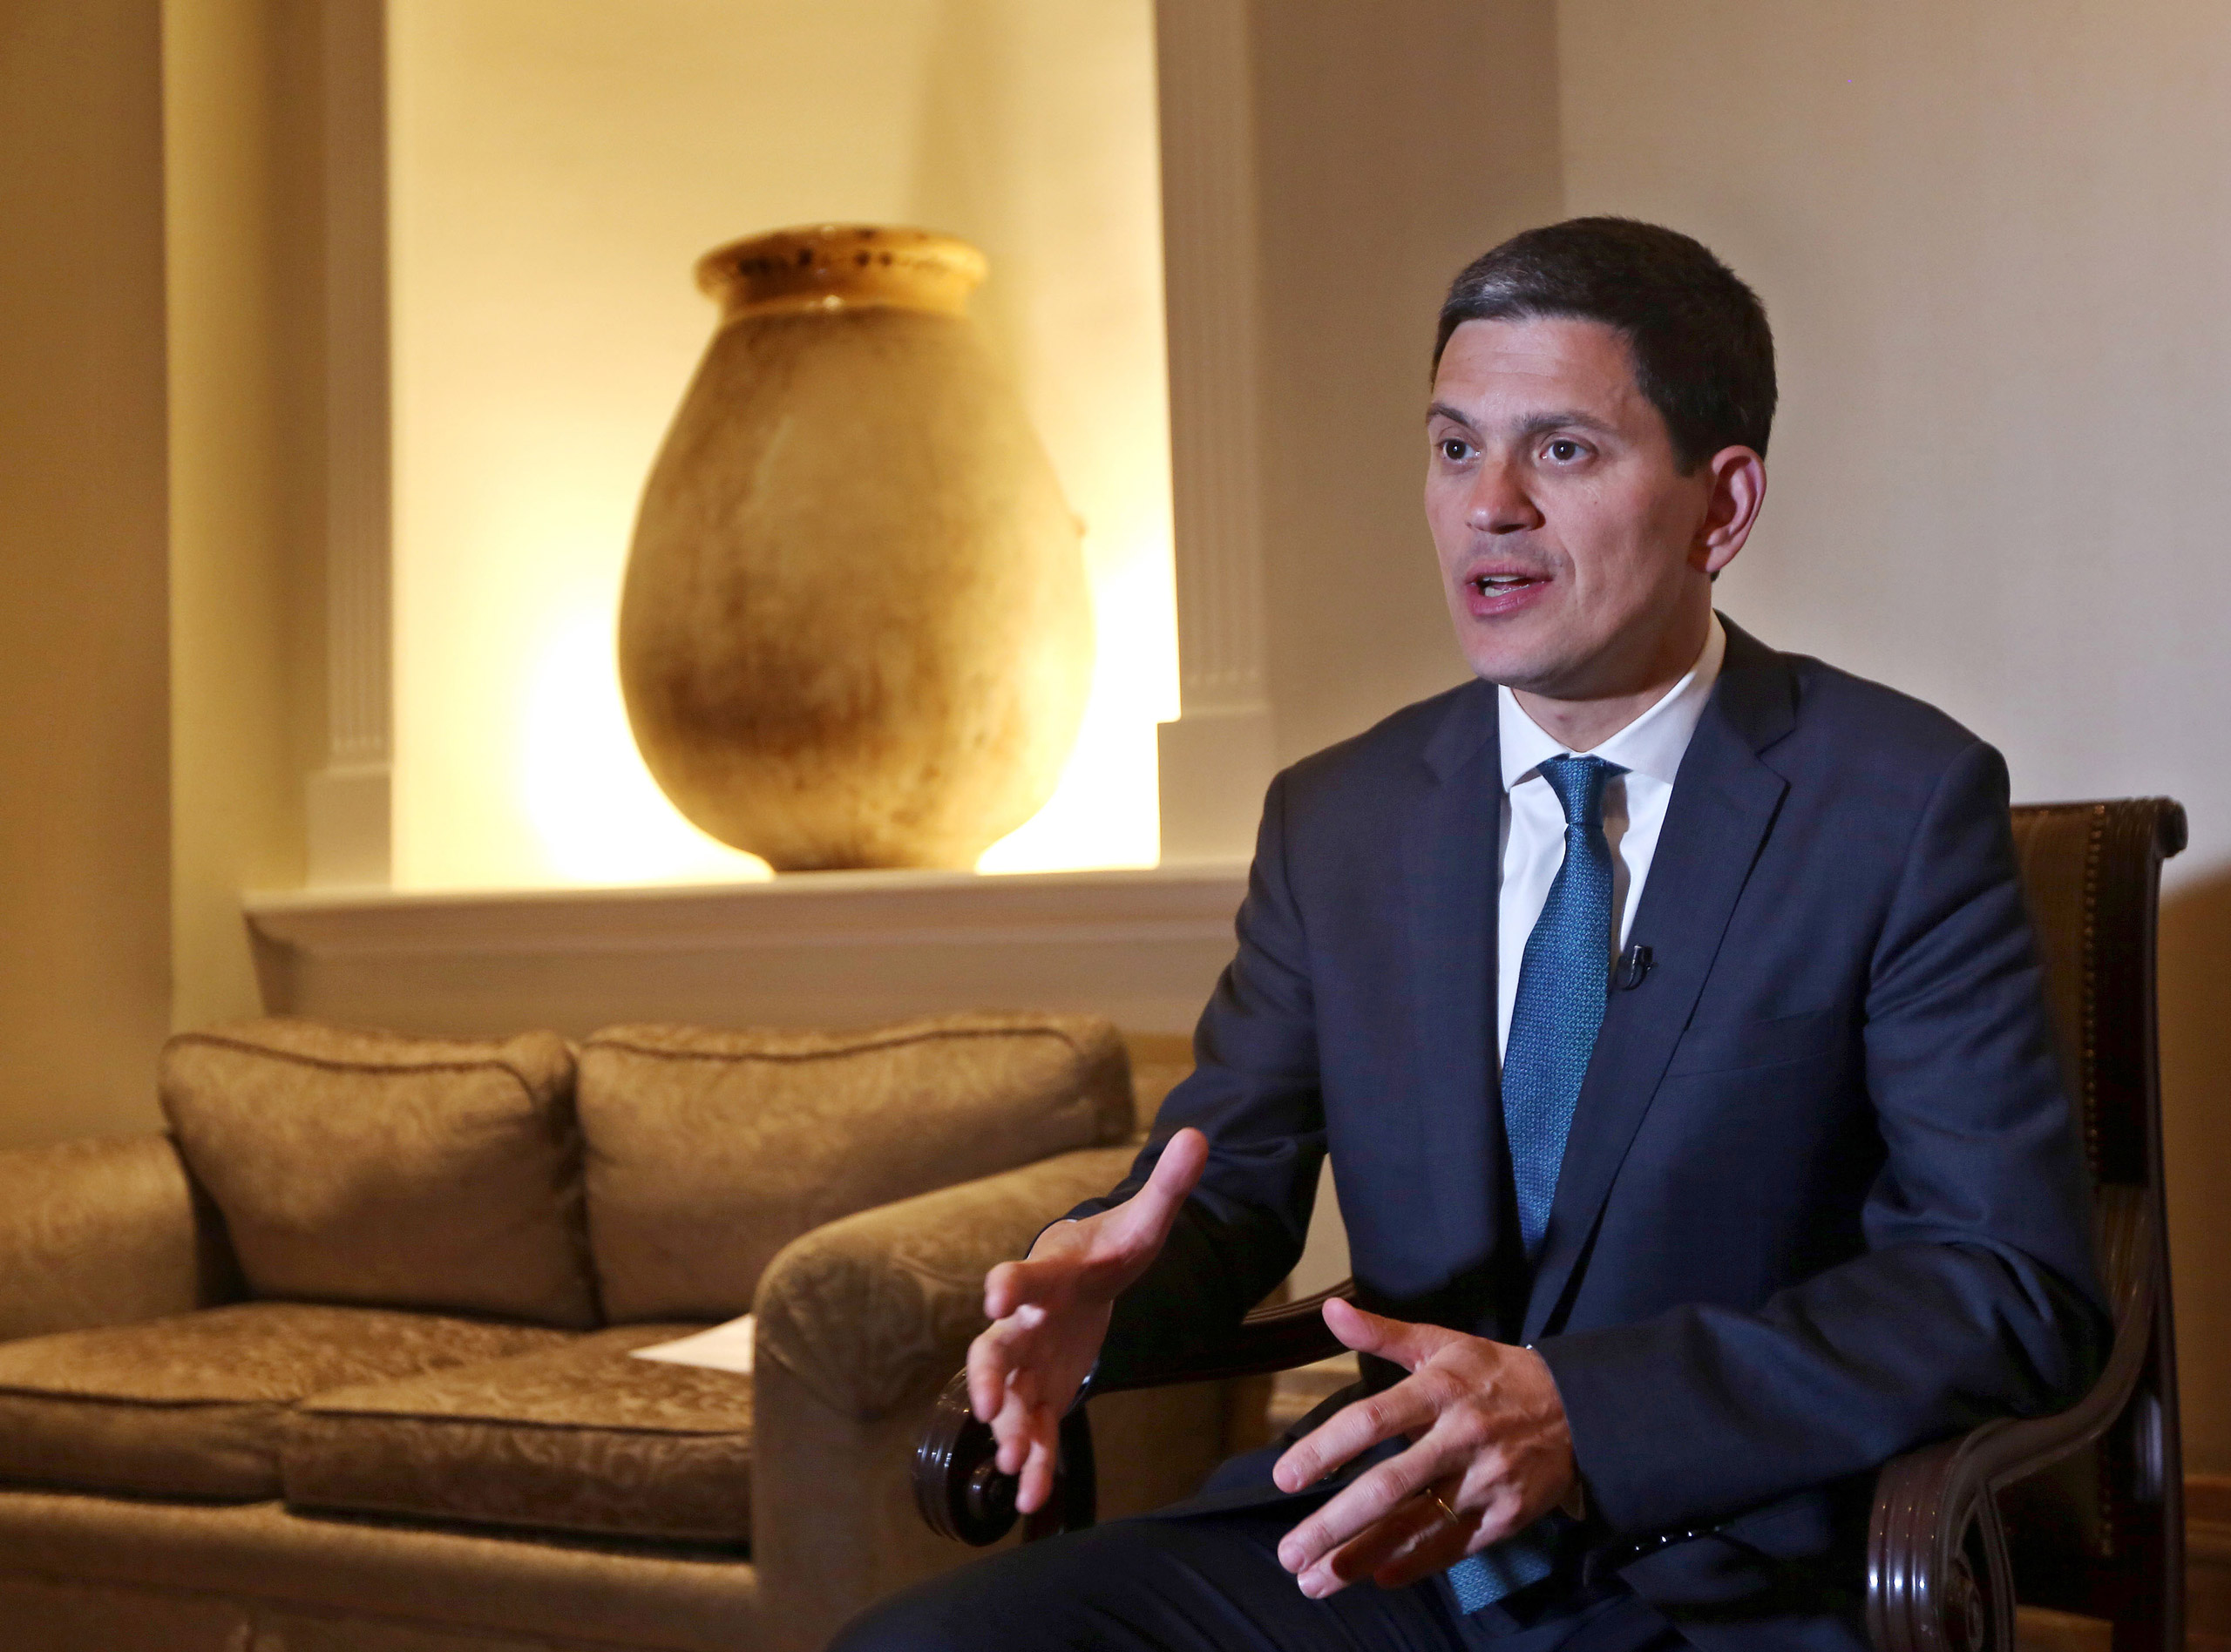 David Miliband, the President and CEO of the International Rescue Committee, speaks during an interview with The Associated Press in Beirut, Lebanon, Thursday, April 9, 2015. Miliband says that the whole international community shares responsibility for the consequences of the Syria crisis. The international aid group has called on the United States to resettle 65,000 Syrian refugees before the end of 2016.(AP Photo/Bilal Hussein)